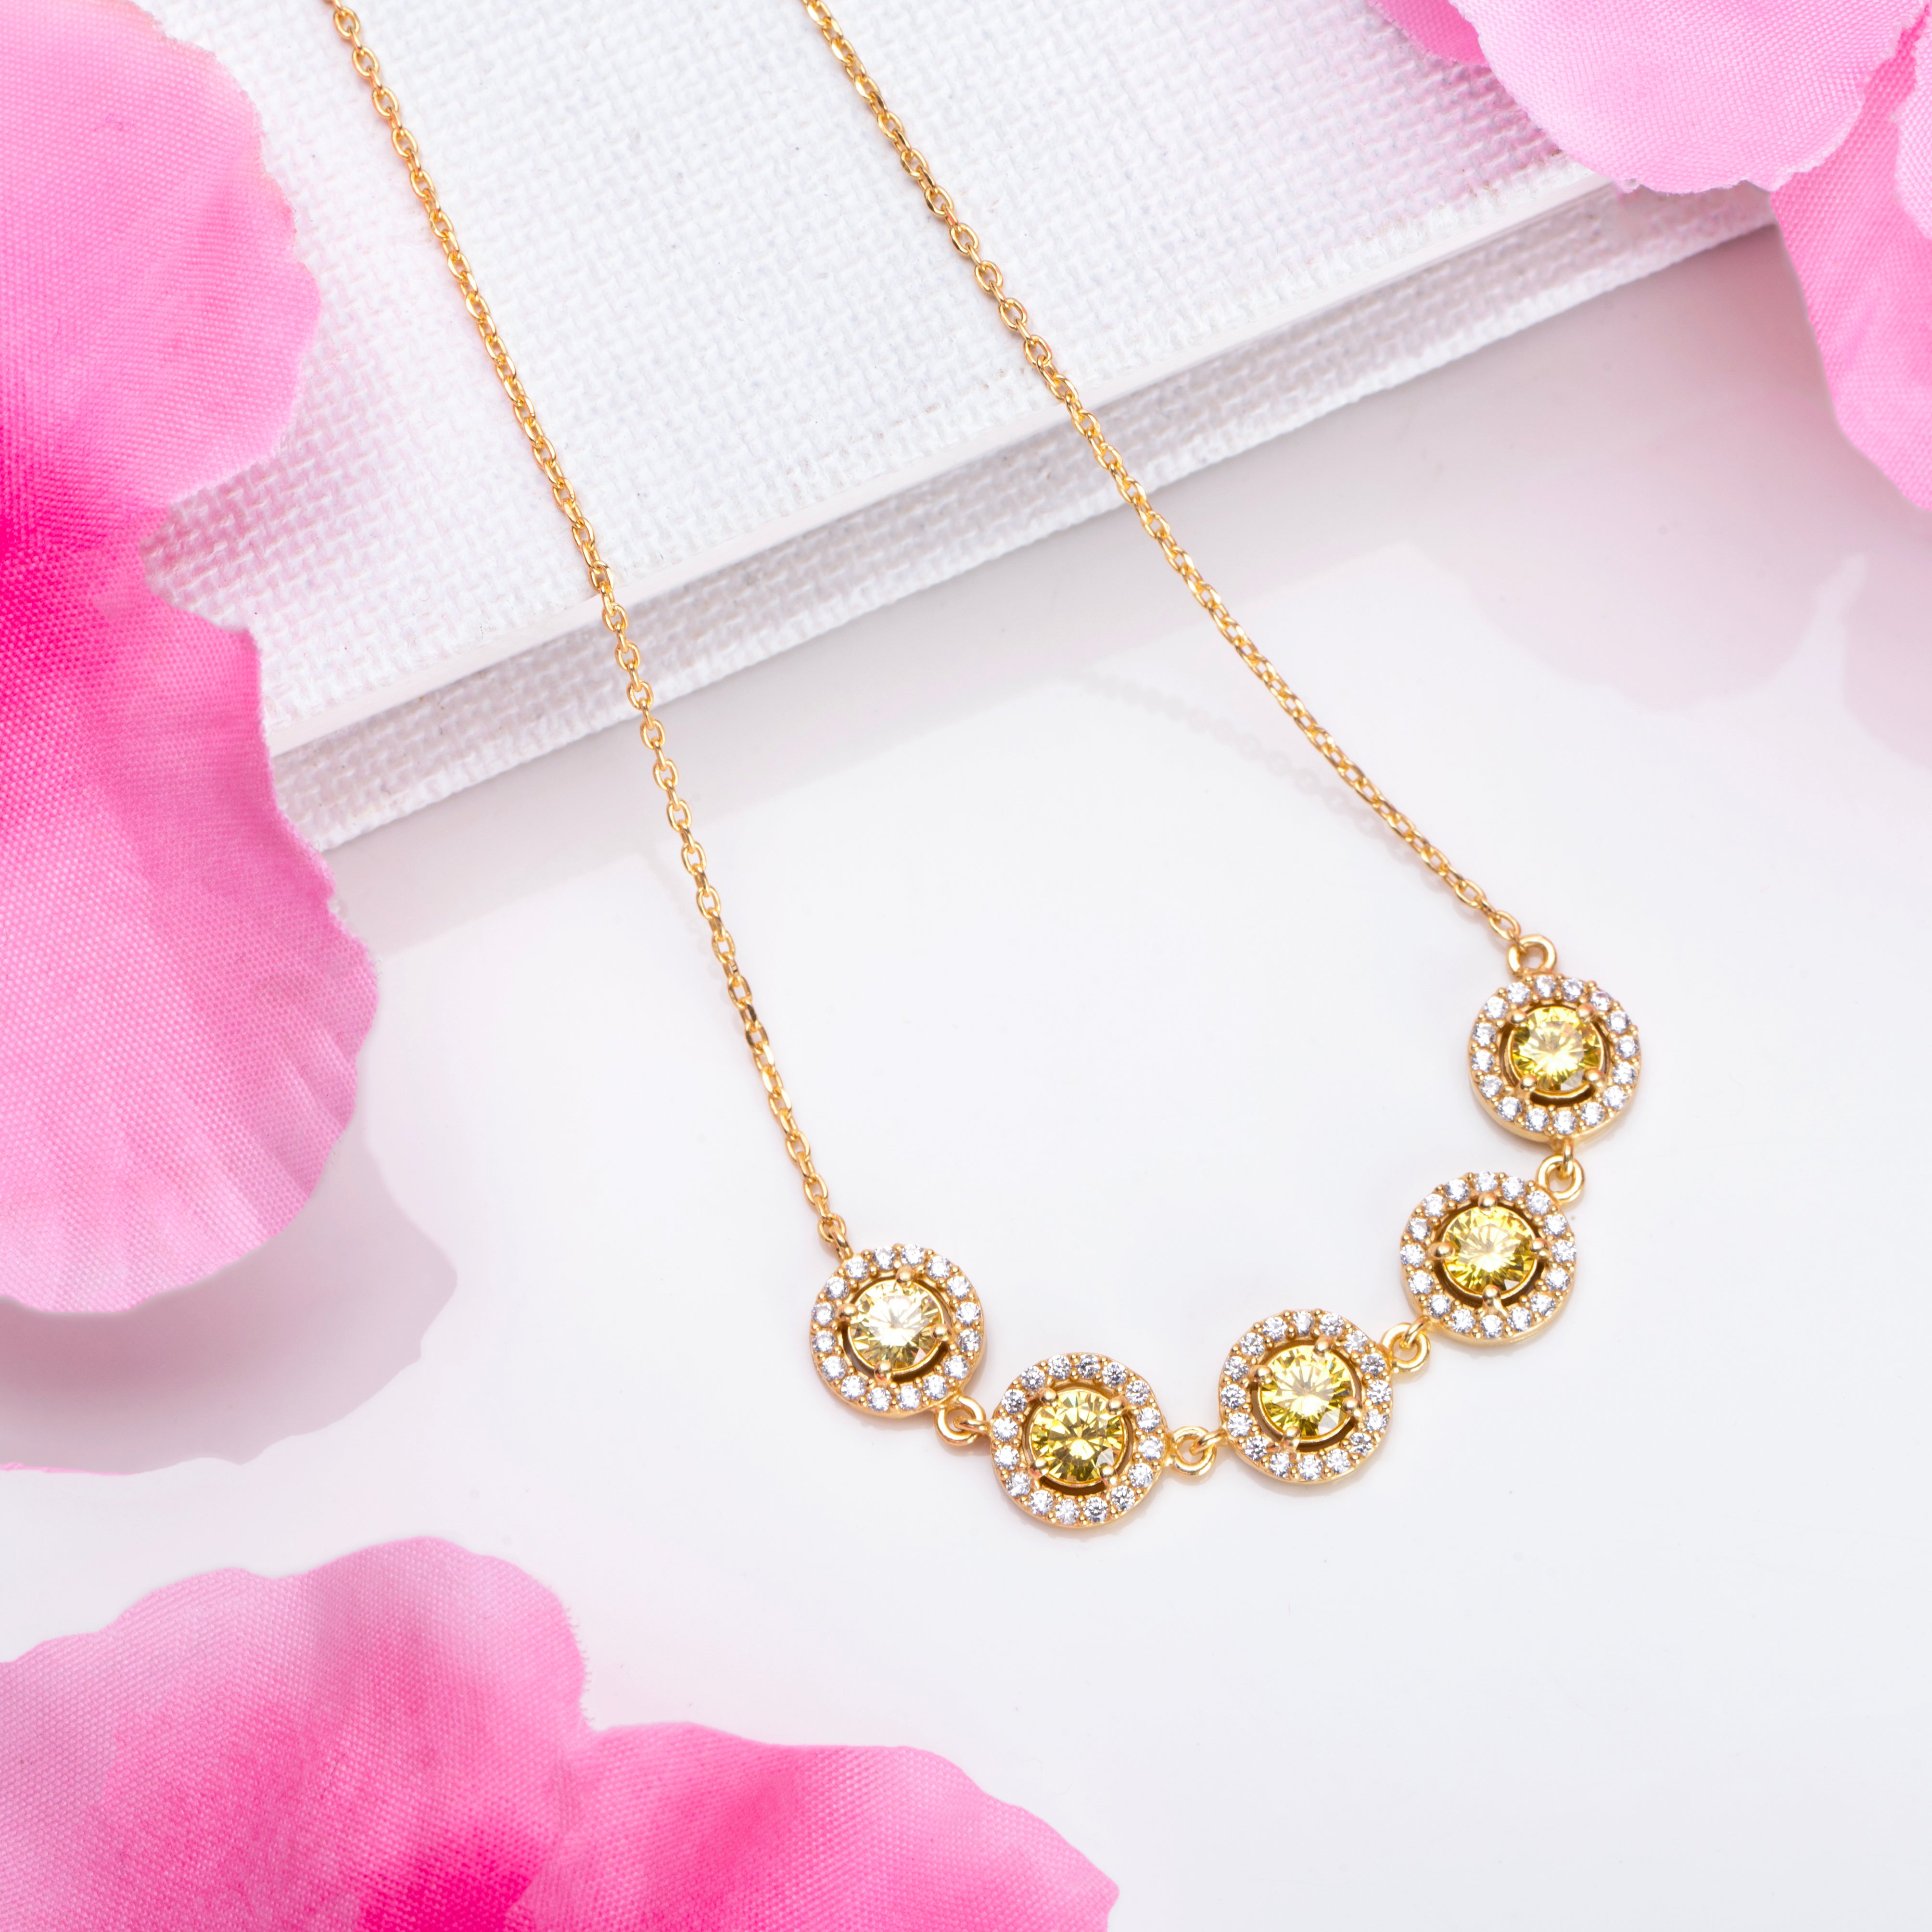 Golden Halo Harmony Gold-Plated 925 Sterling Silver Necklace